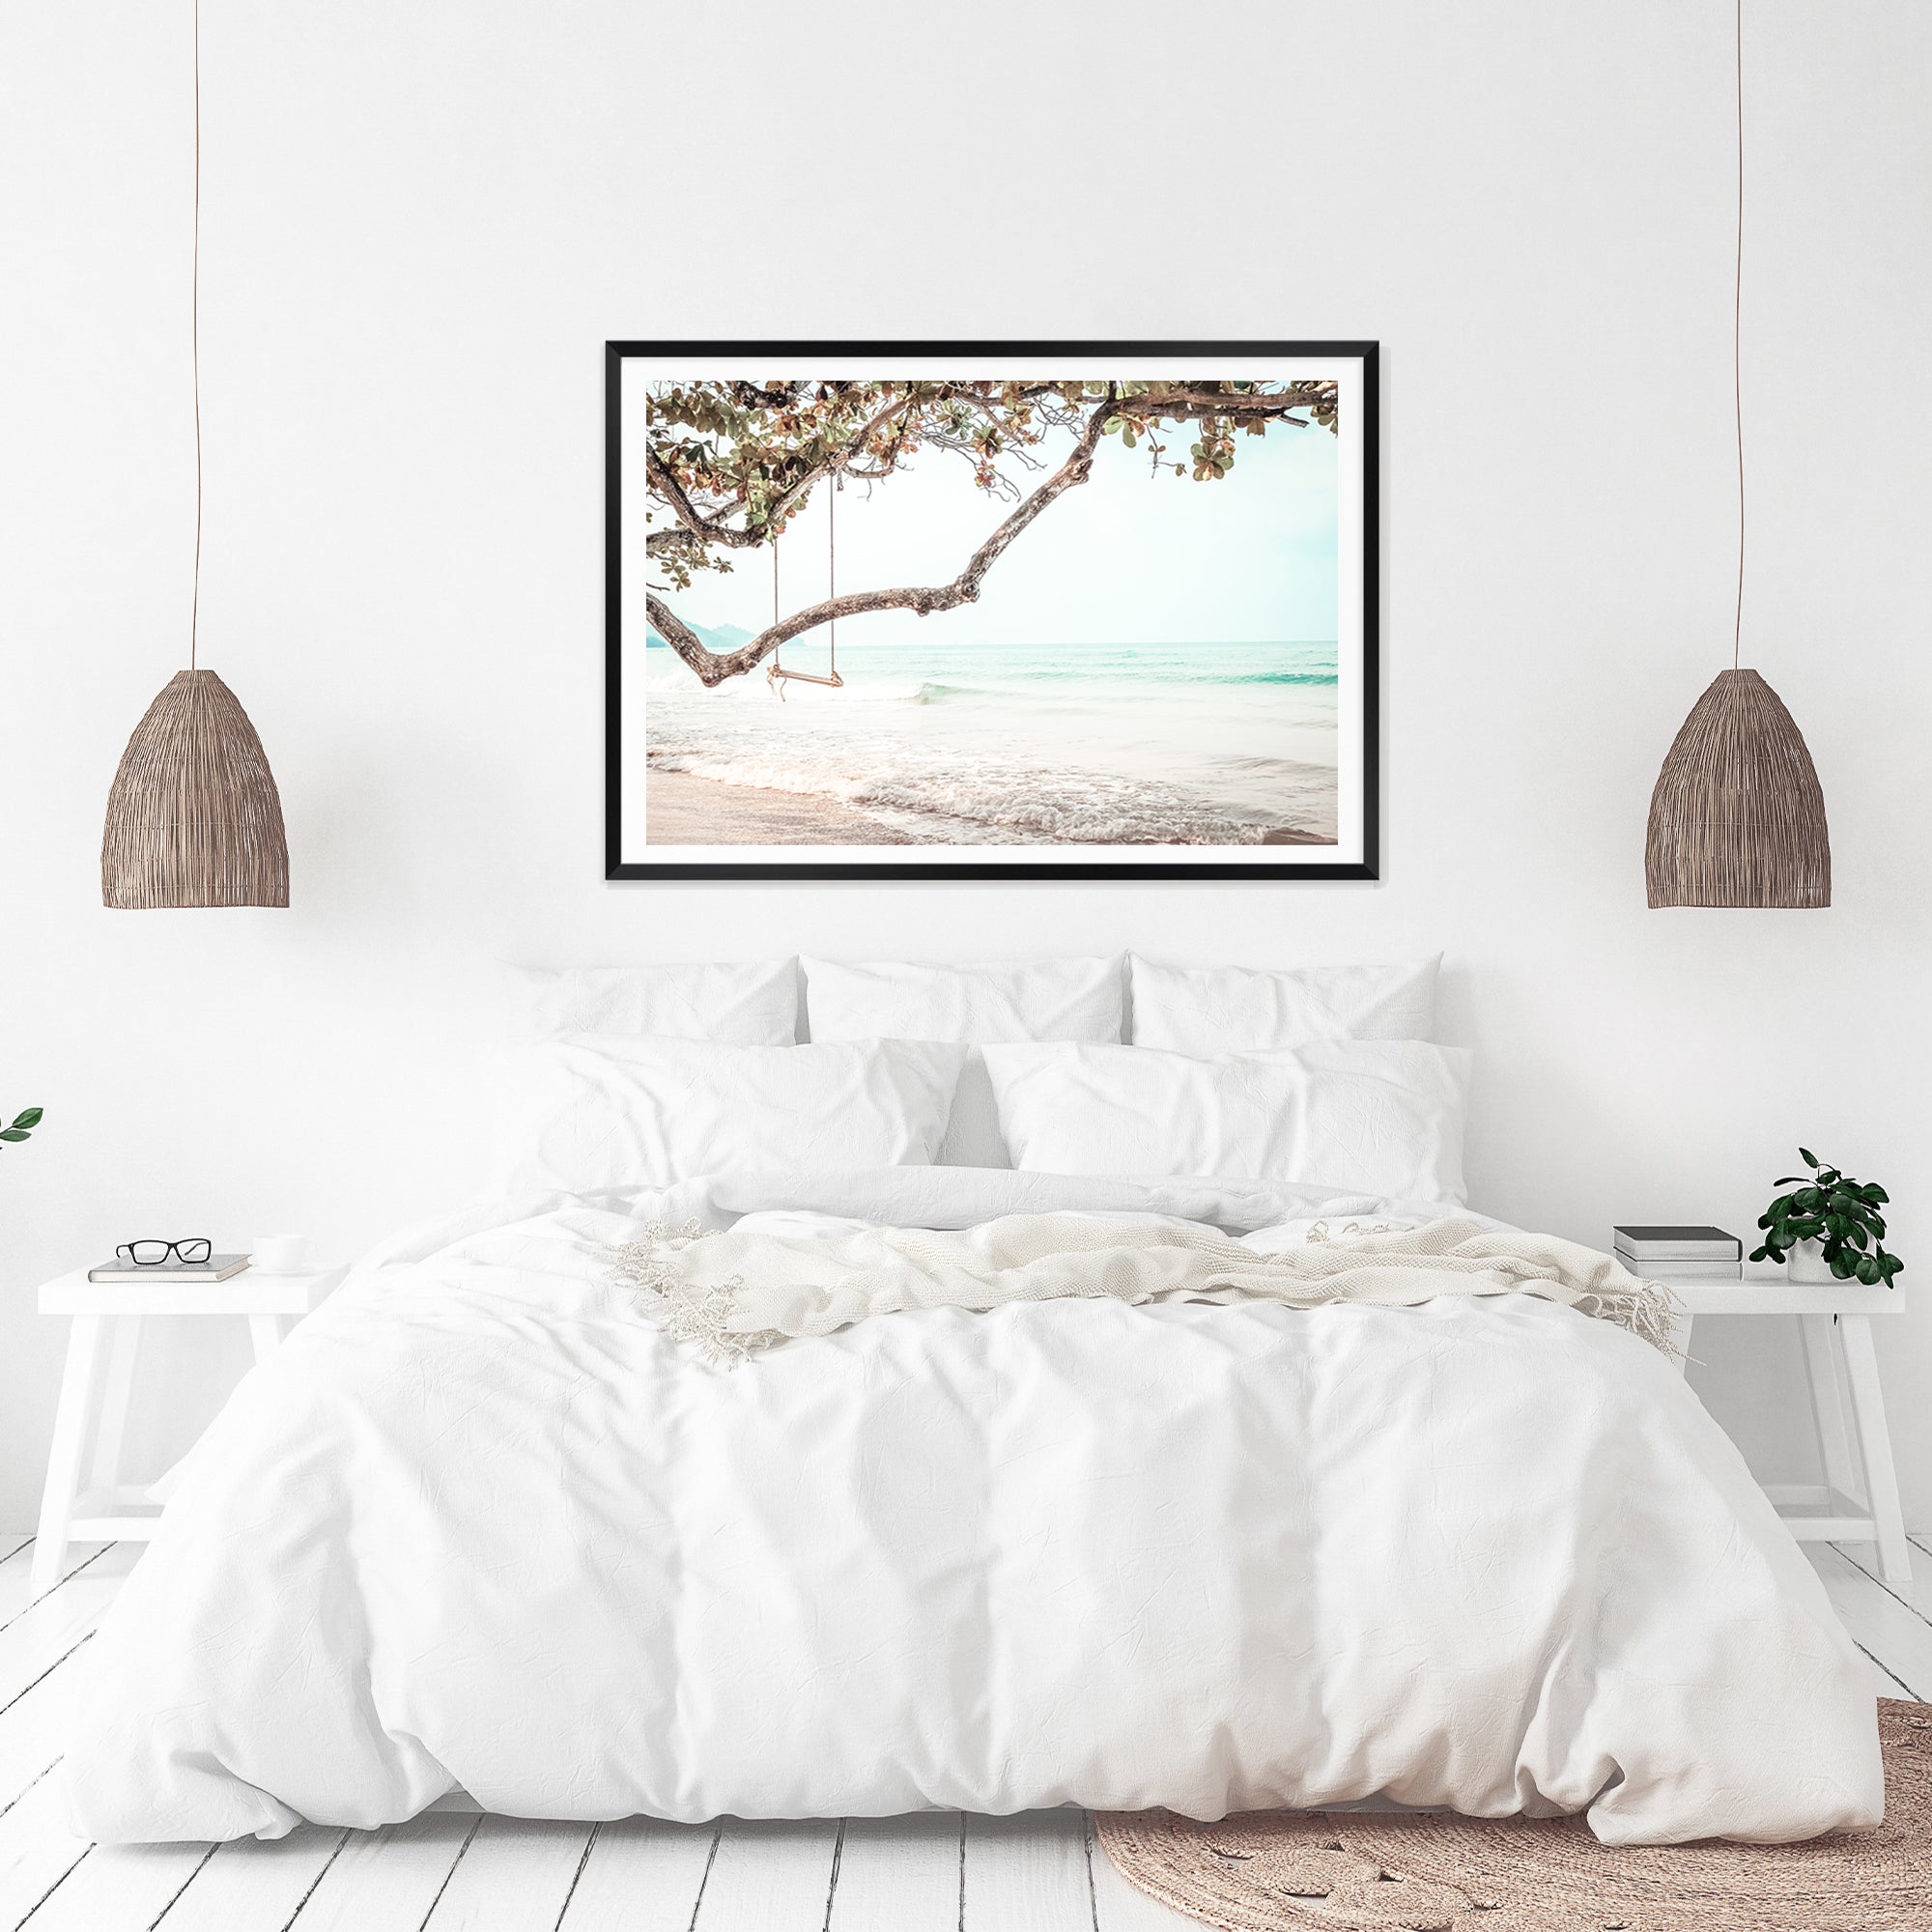 A photographic artwork of a swing among the trees at the beach, available in canvas or print, framed or unframed.